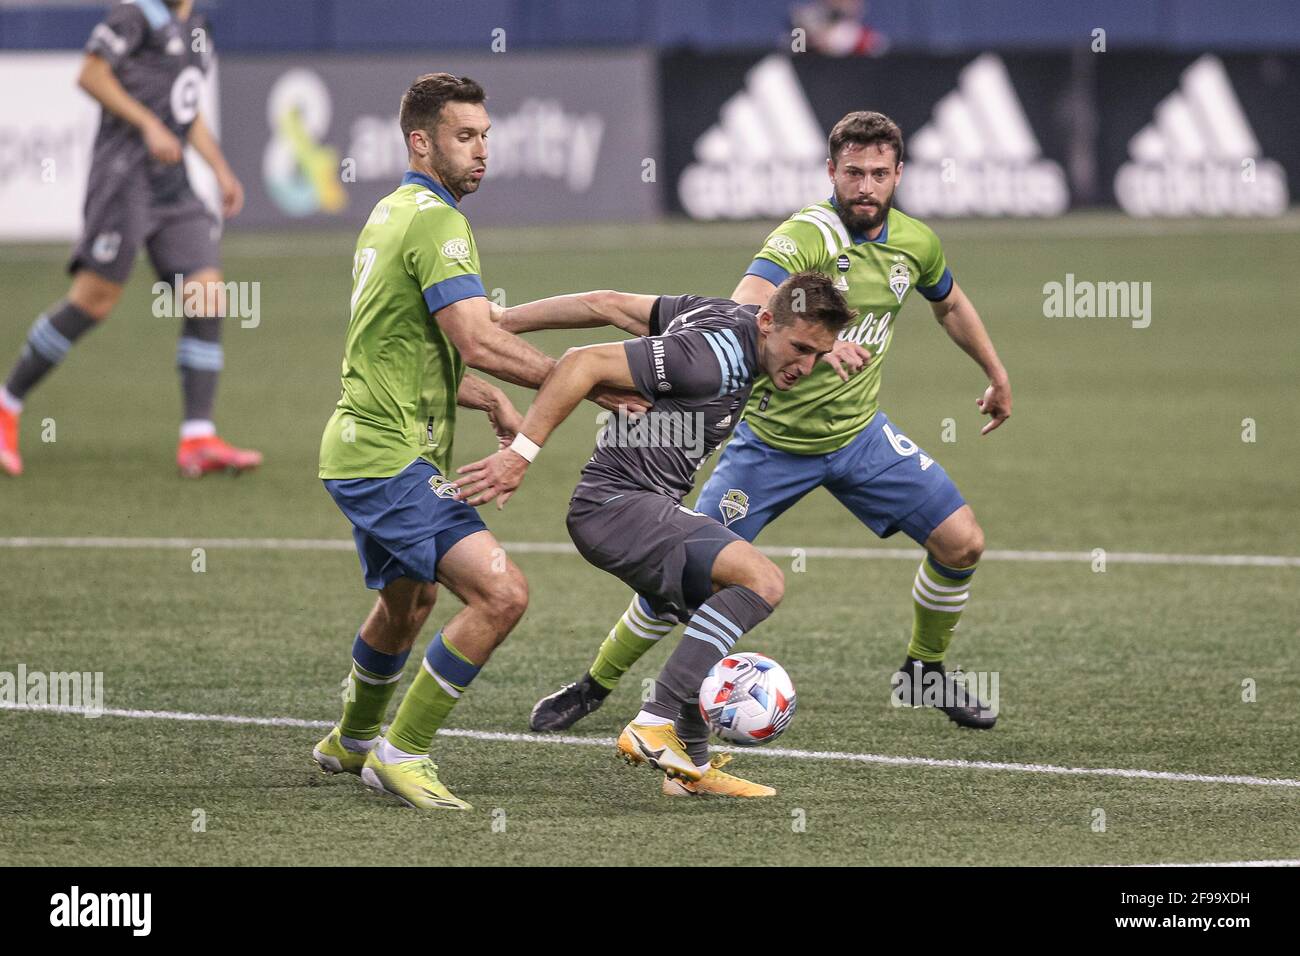 Minnesota United FC midfielder Ethan Finlay (13) with the ball against Seattle Sounders FC midfielder Joao Paulo (6) and defender Will Bruin (17) duri Stock Photo